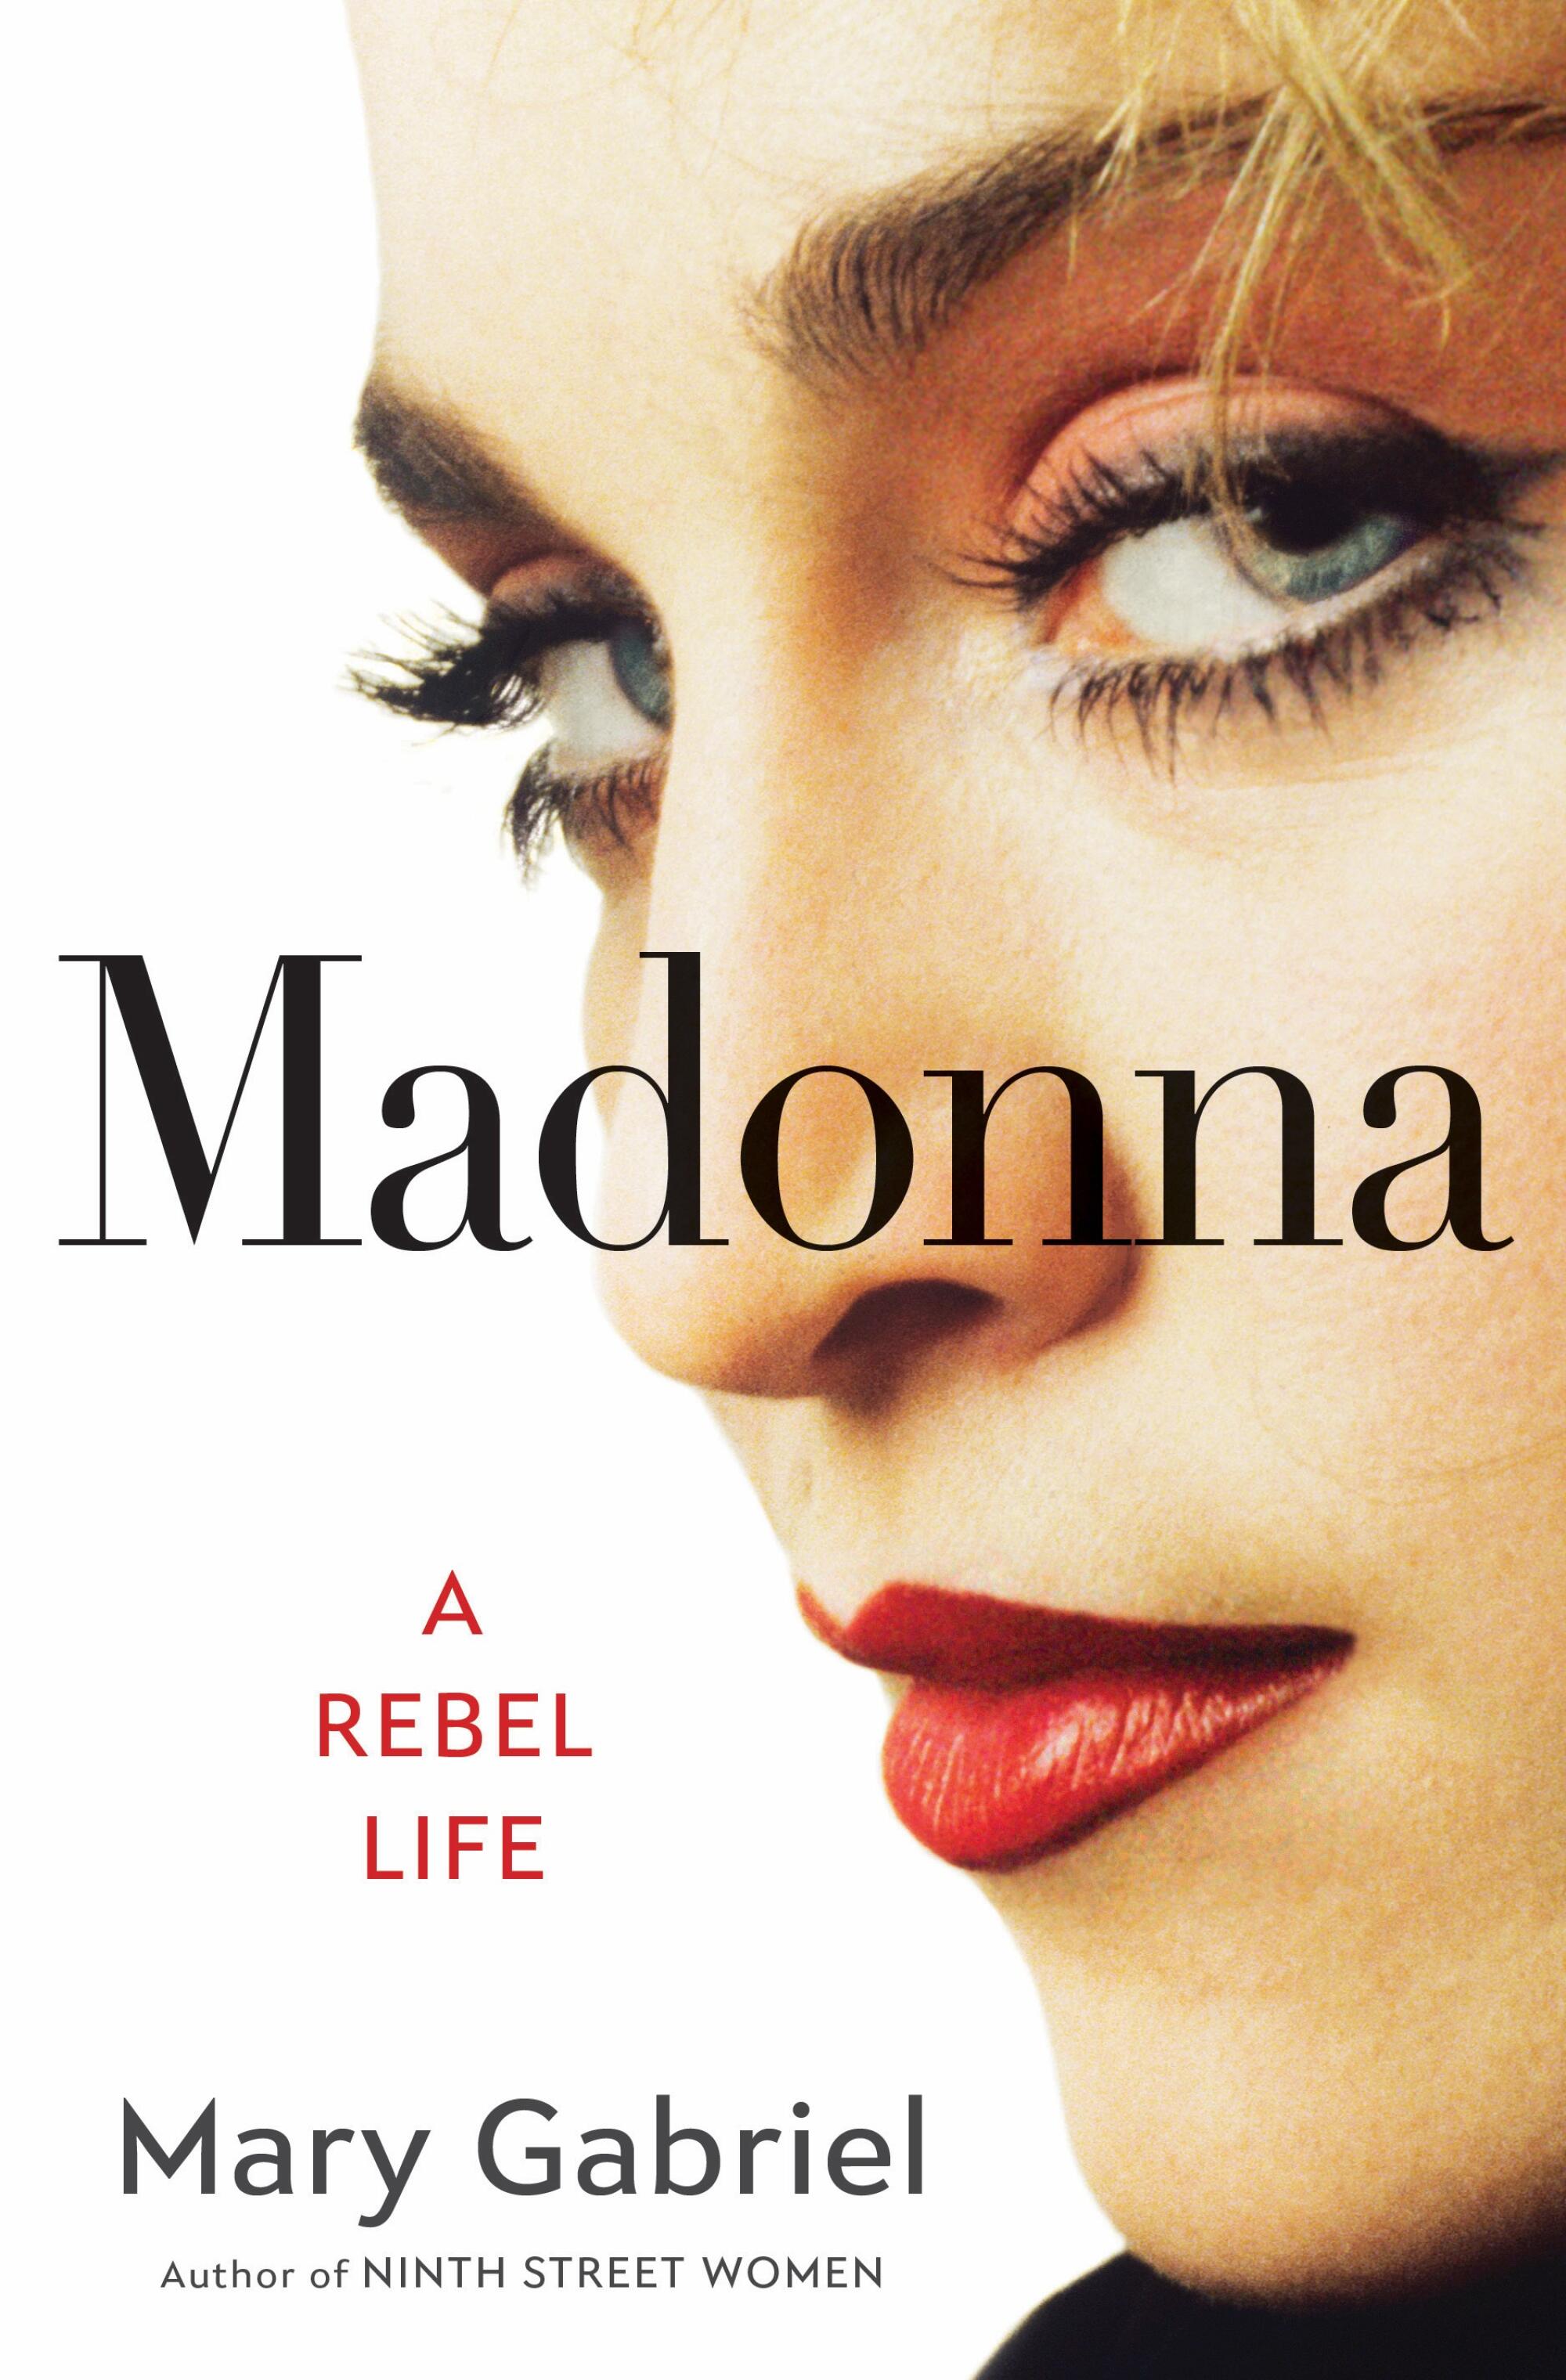 Book cover of "Madonna: A Rebel Life" by Mary Gabriel